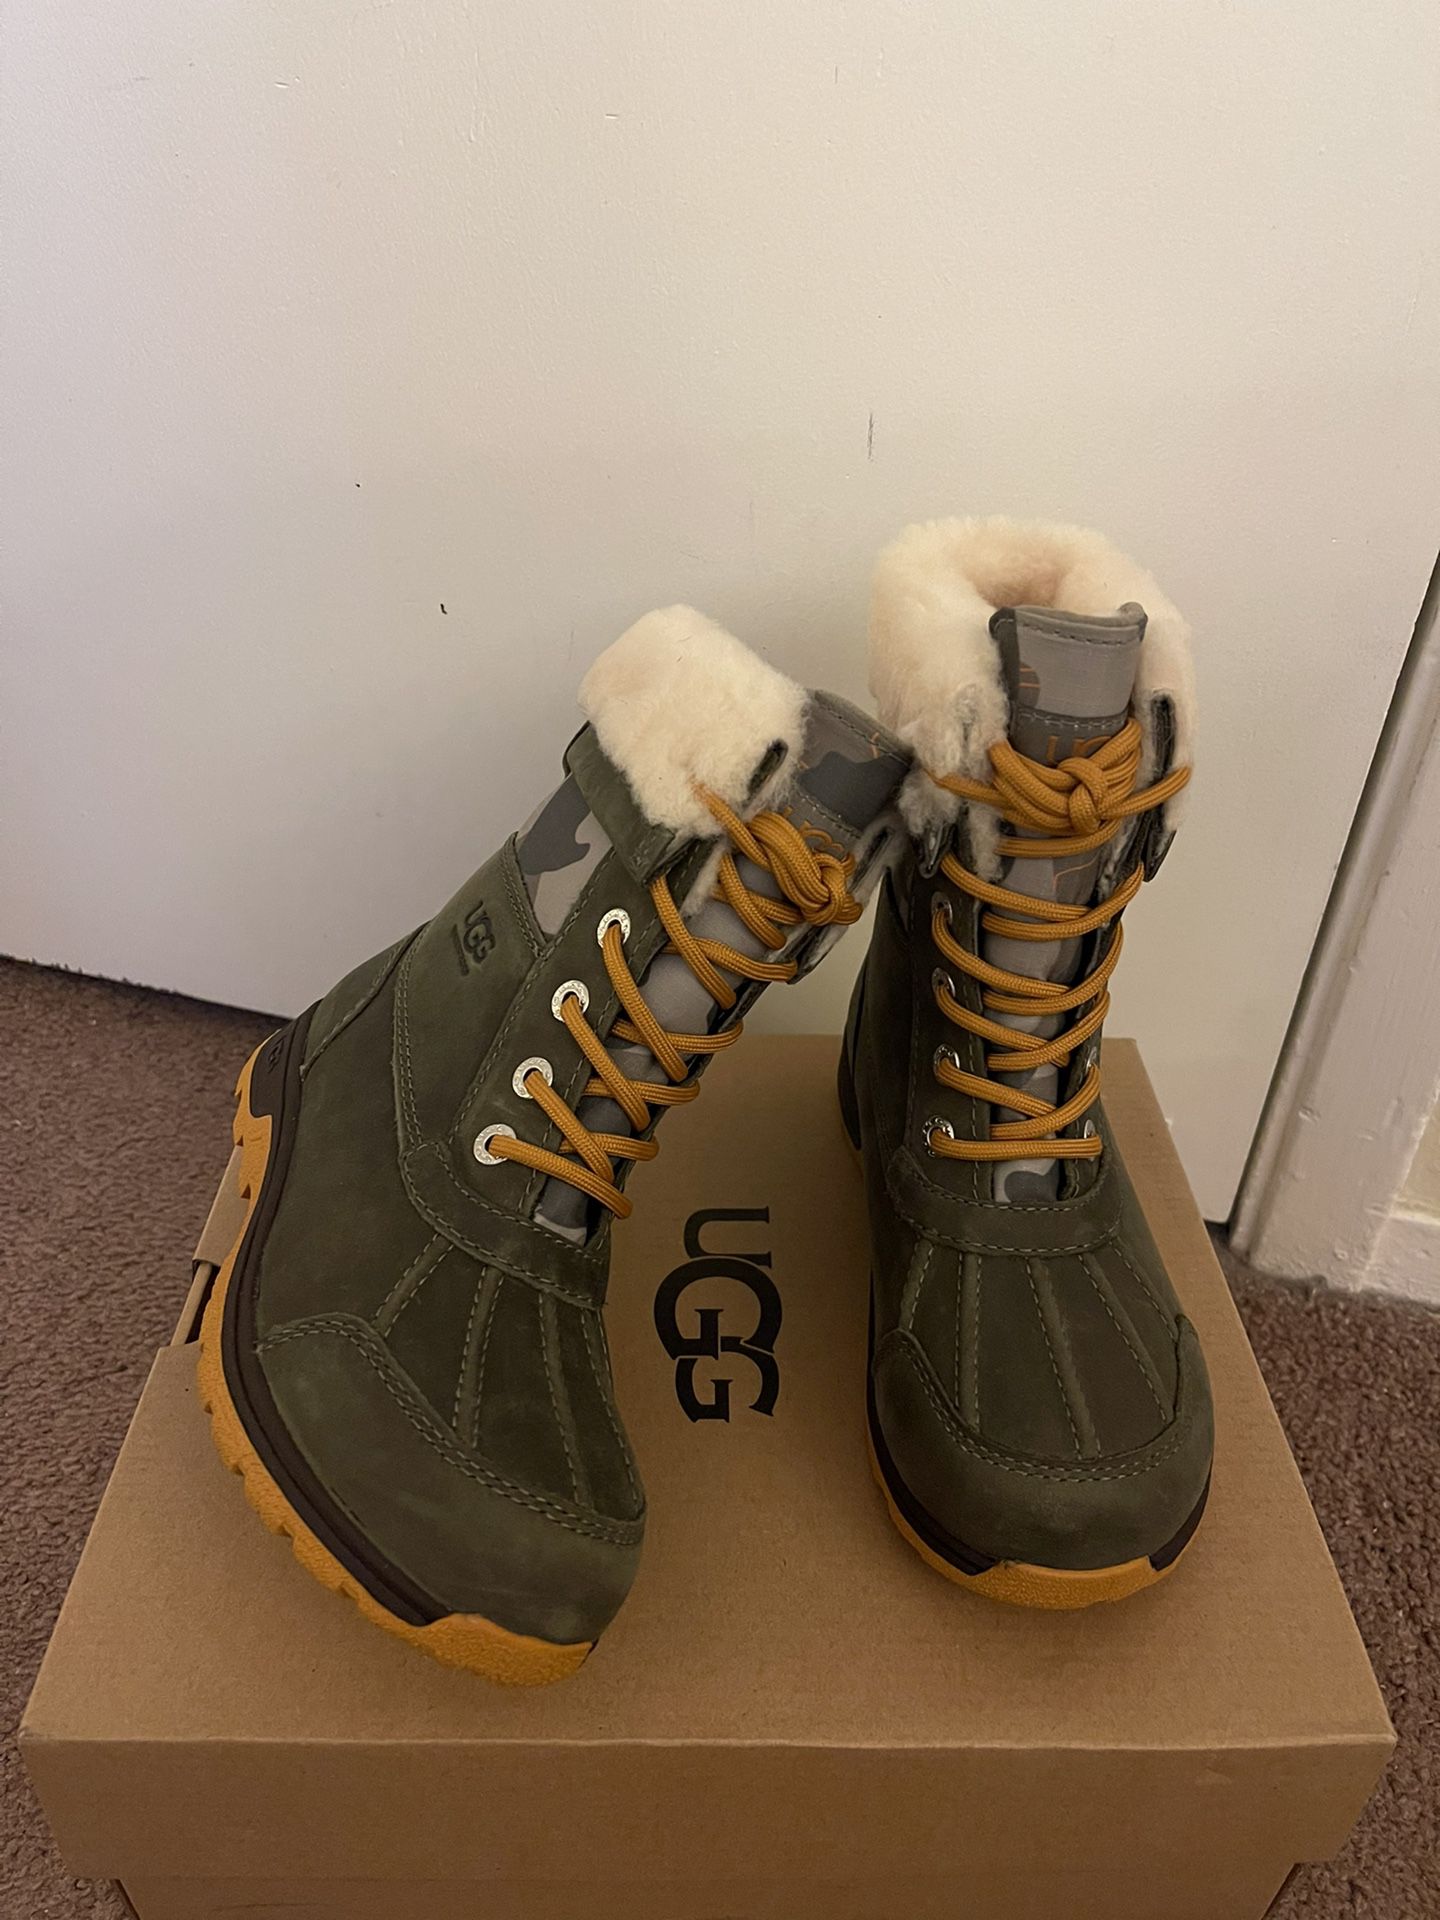 100% Authentic Brand New in Box UGG Butte II Camo Snow Boots / Color BNDL / Women size 6 (Big Kids 4)